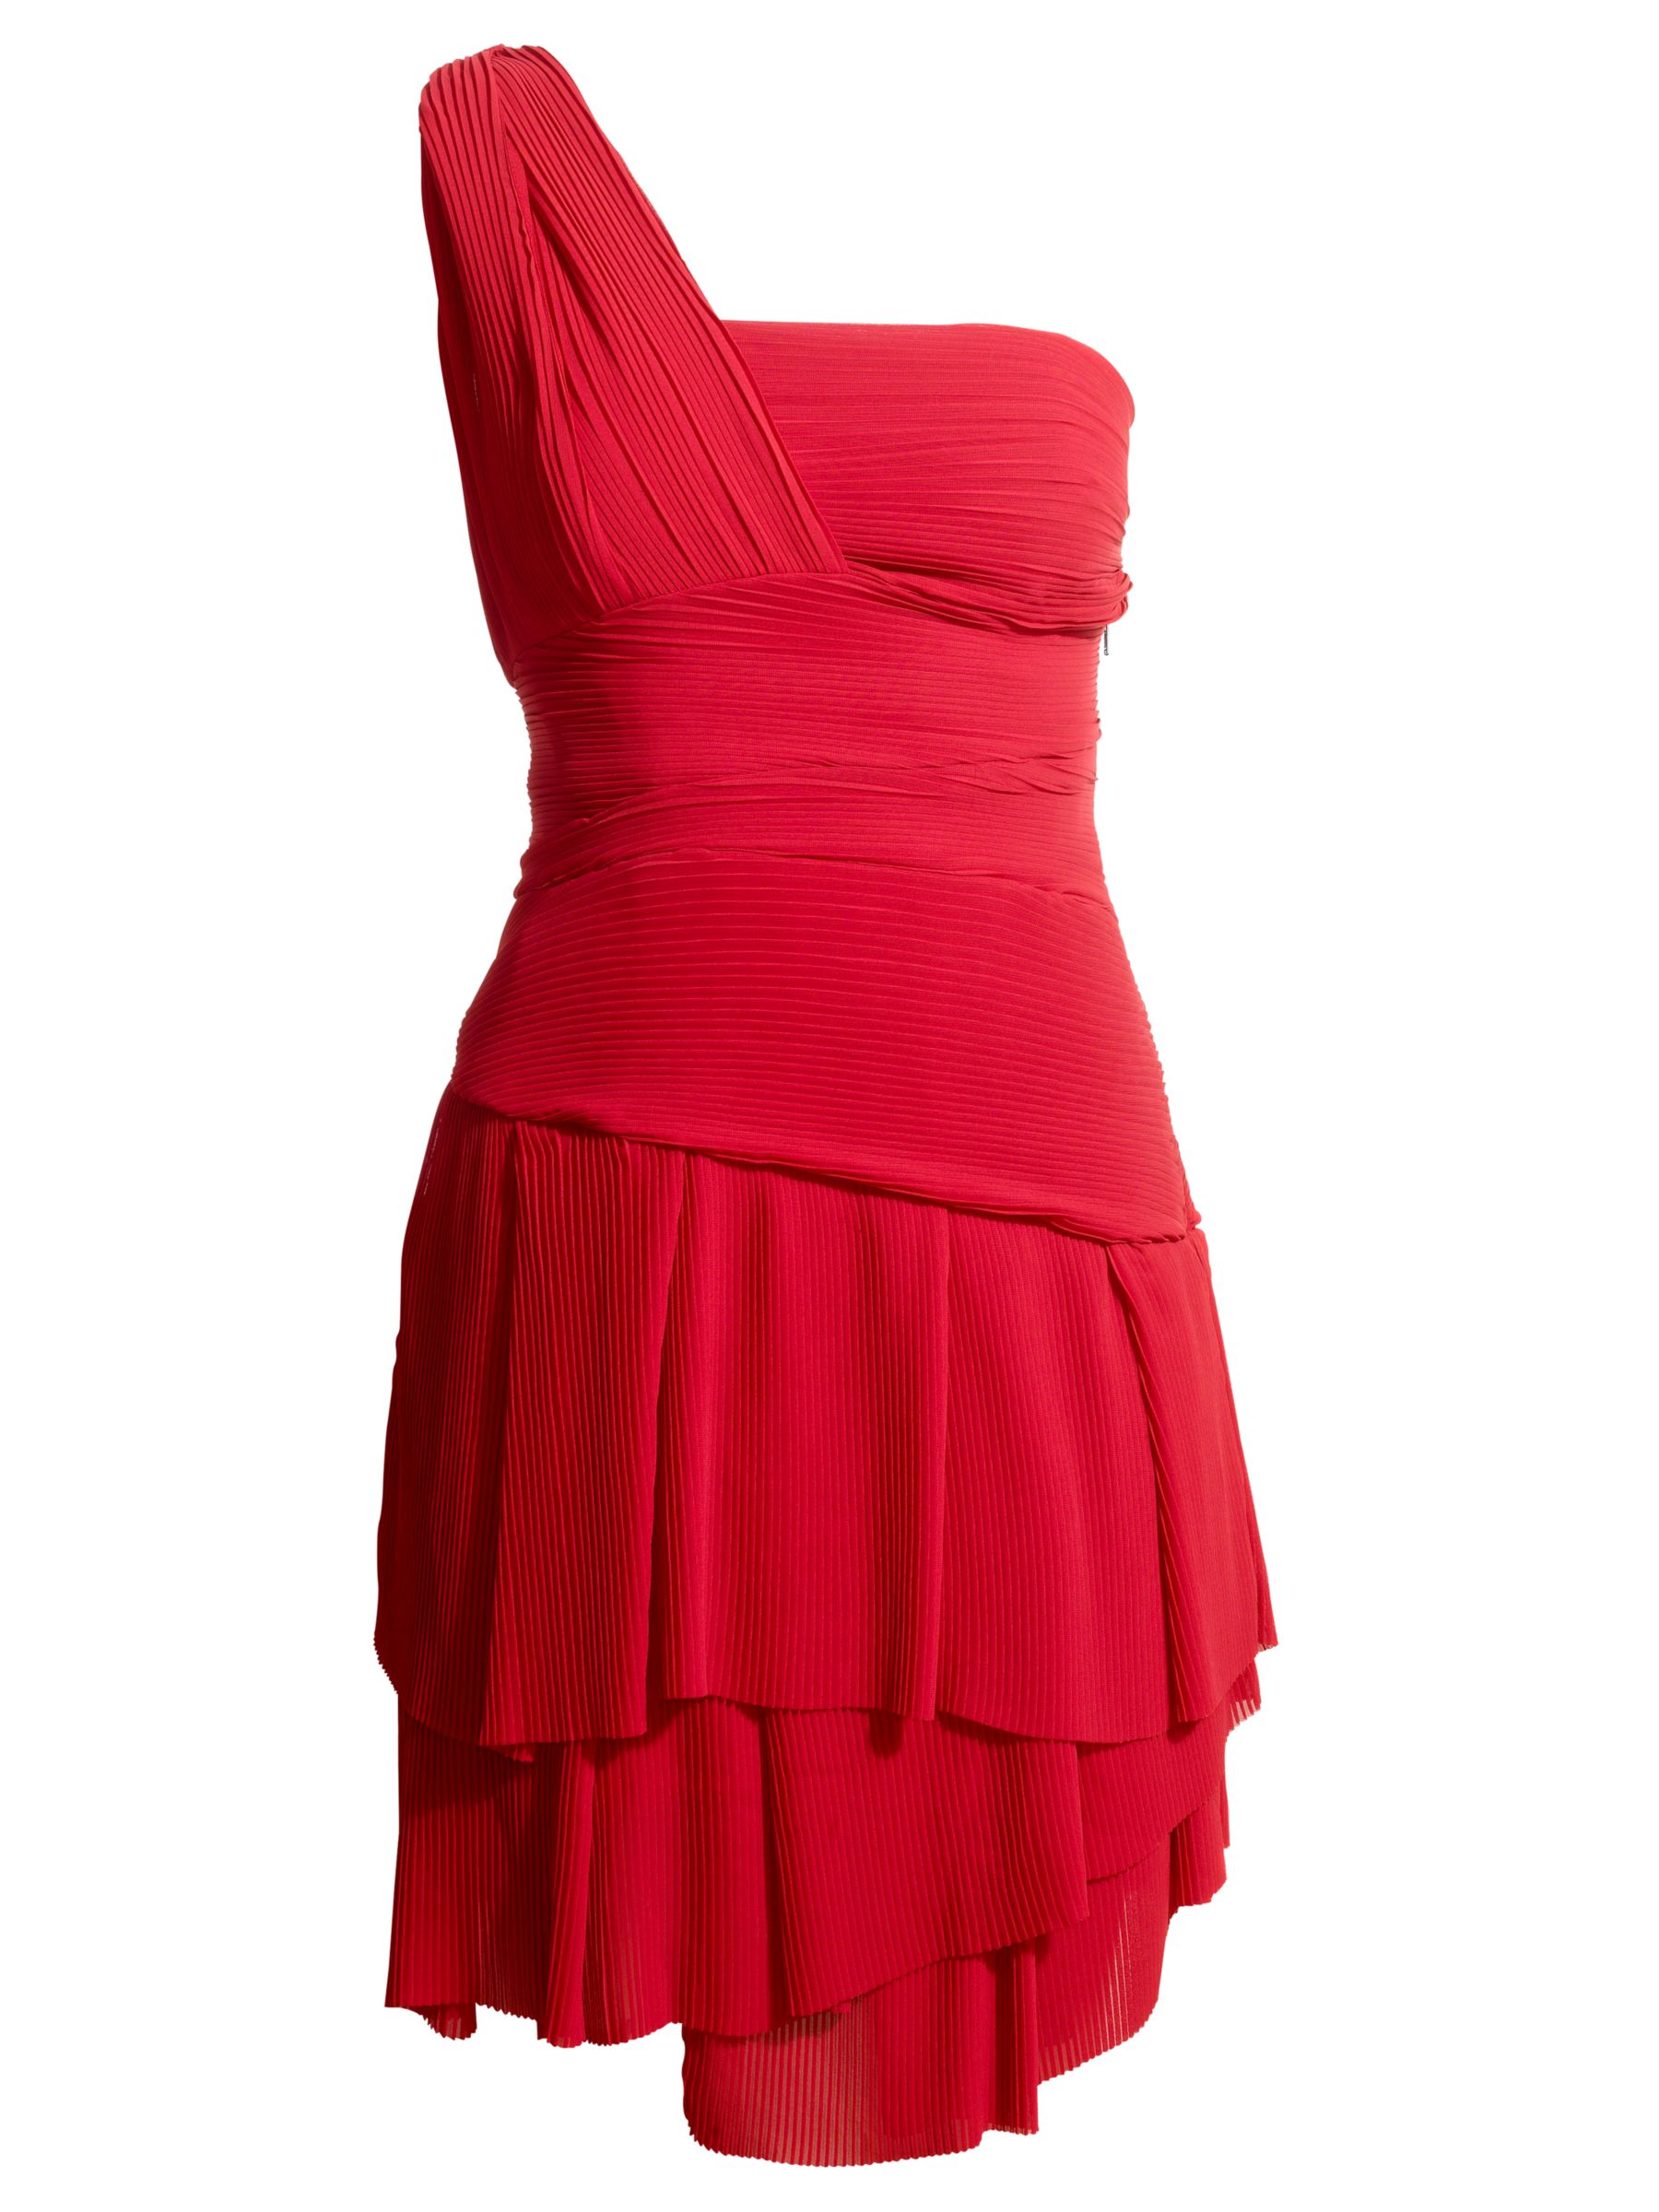 Reiss Dacey Pleated Frill Dress, Rouge at John Lewis